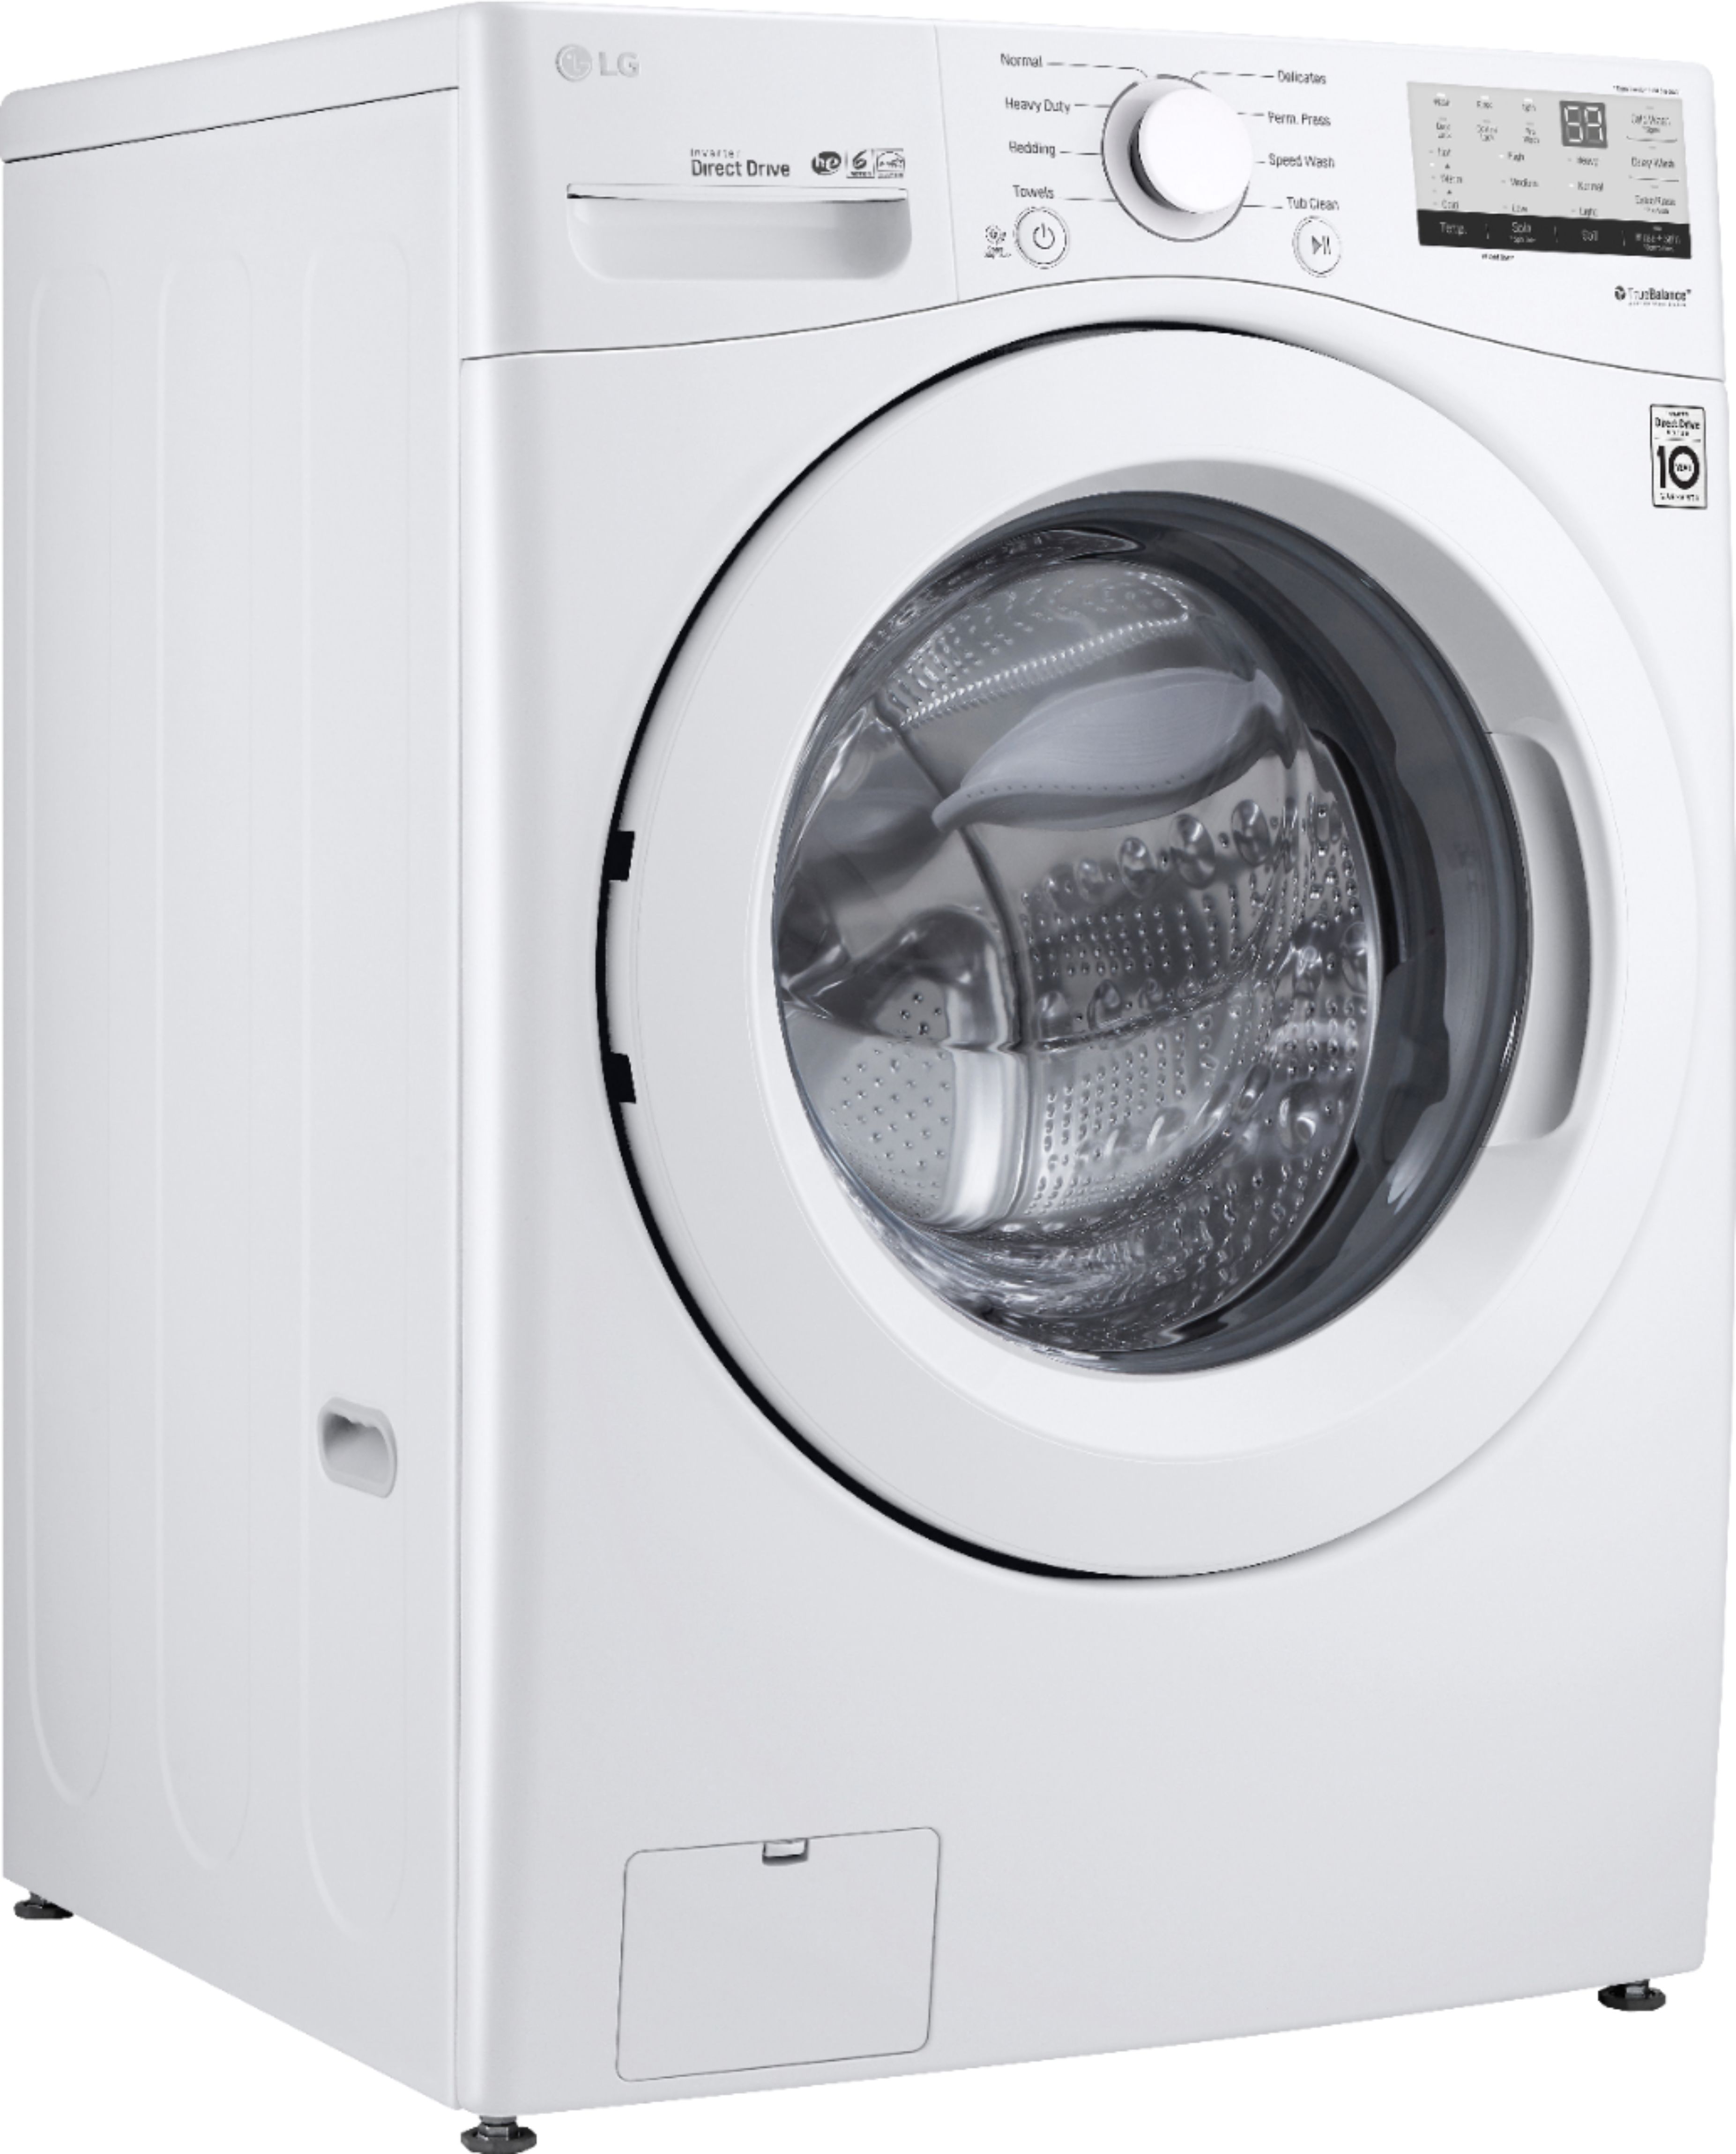 Angle View: Samsung - 4.5 Cu. Ft. High-Efficiency Stackable Smart Front Load Washer with Steam and Super Speed Wash - White